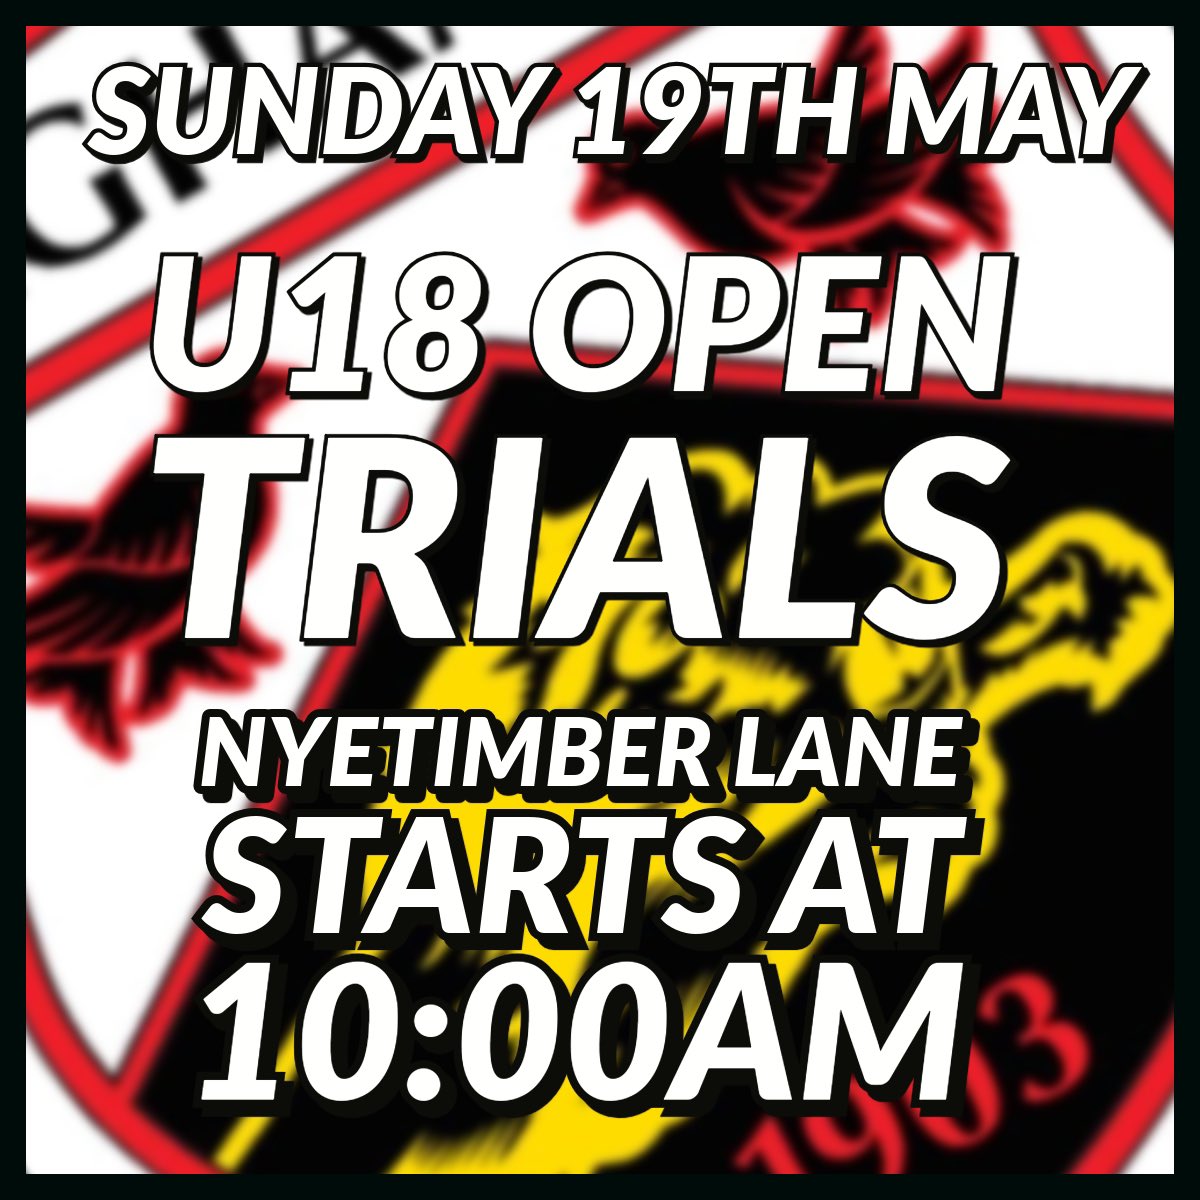 Sun 19th May - U18 Trials Next Sunday new U18 Manager Aaron Millar and his coaching team are holding trails for both the SCFL and ACYFL sides Pagham will be running next season All players aged 16-17 are Welcome Trials begin 10:00am at Nyetimber Lane 🦁